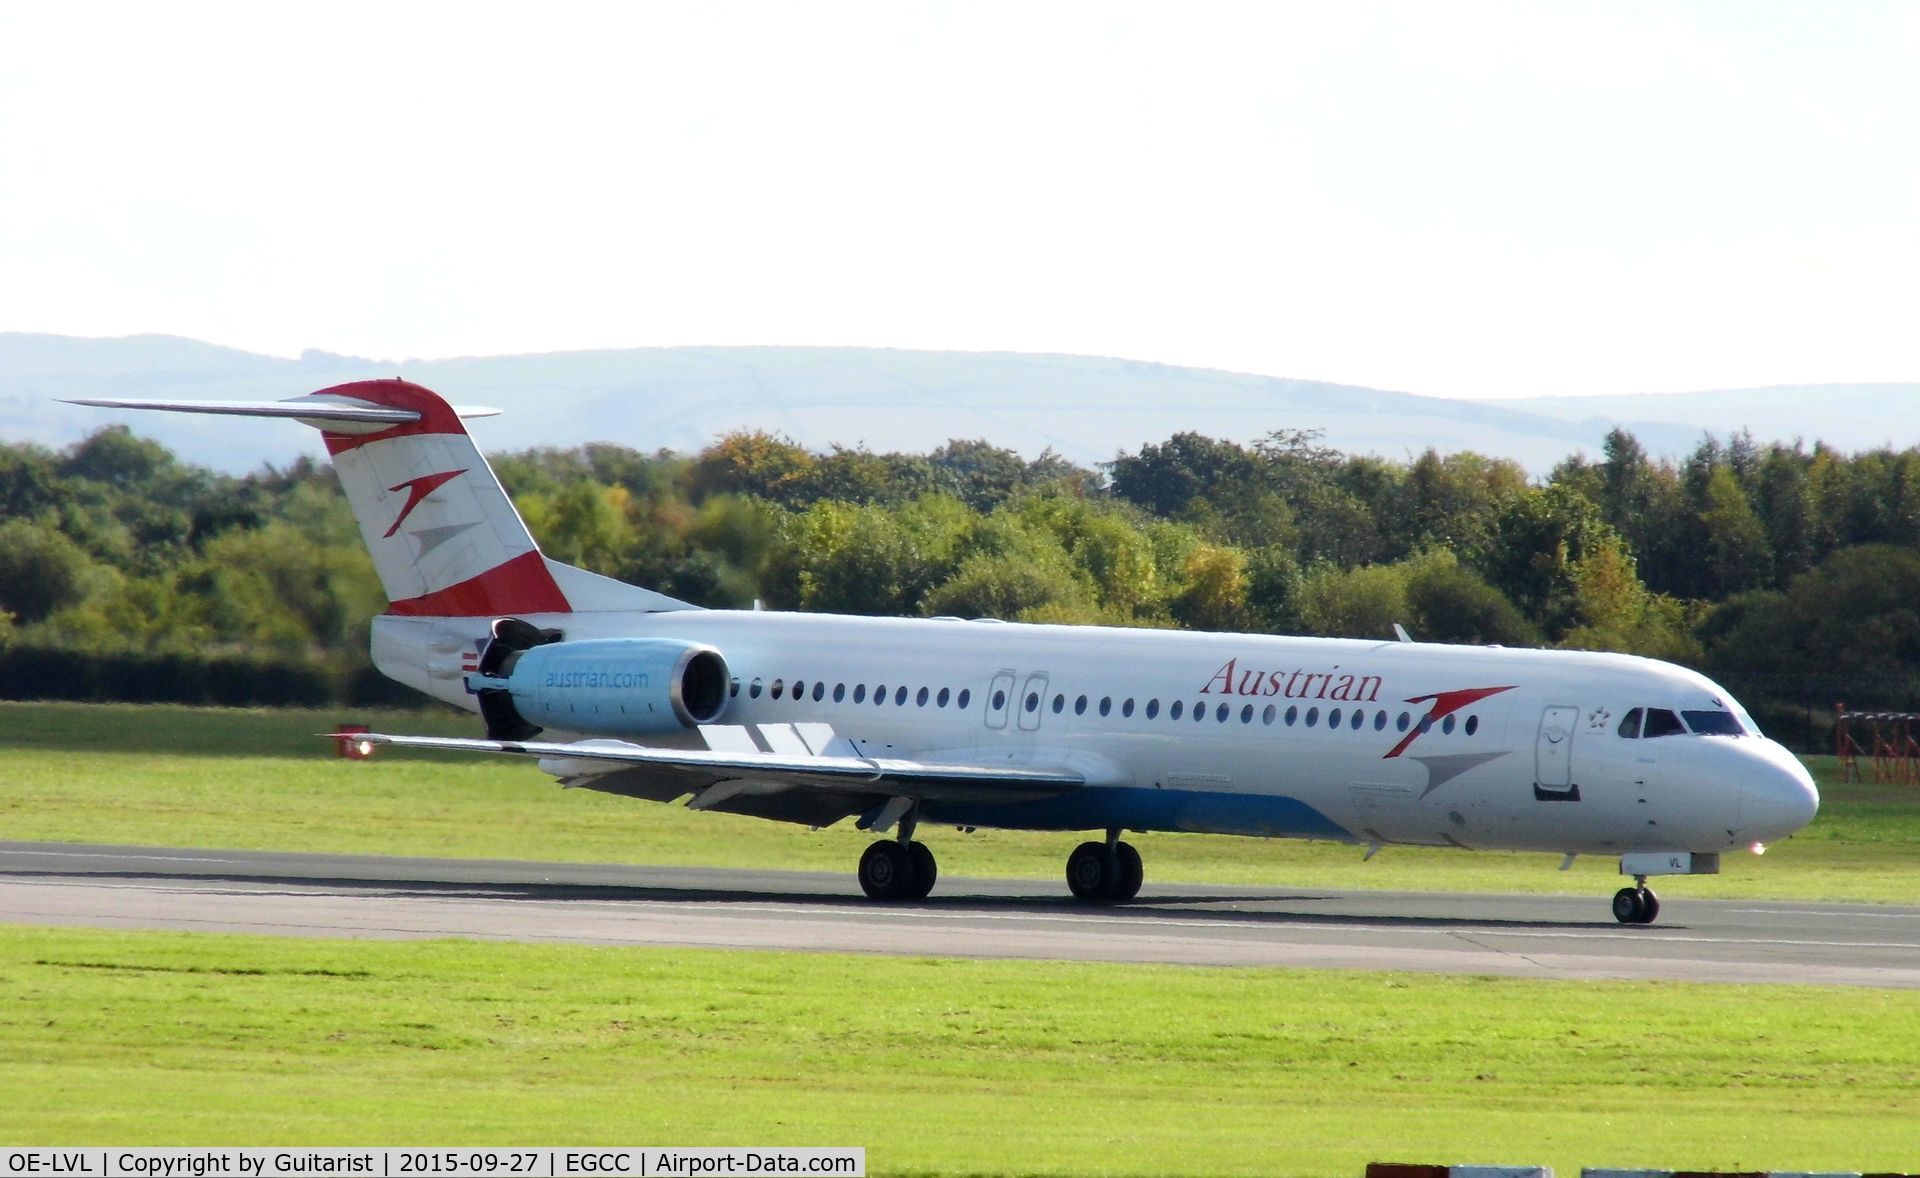 OE-LVL, 1992 Fokker 100 (F-28-0100) C/N 11404, At Manchester